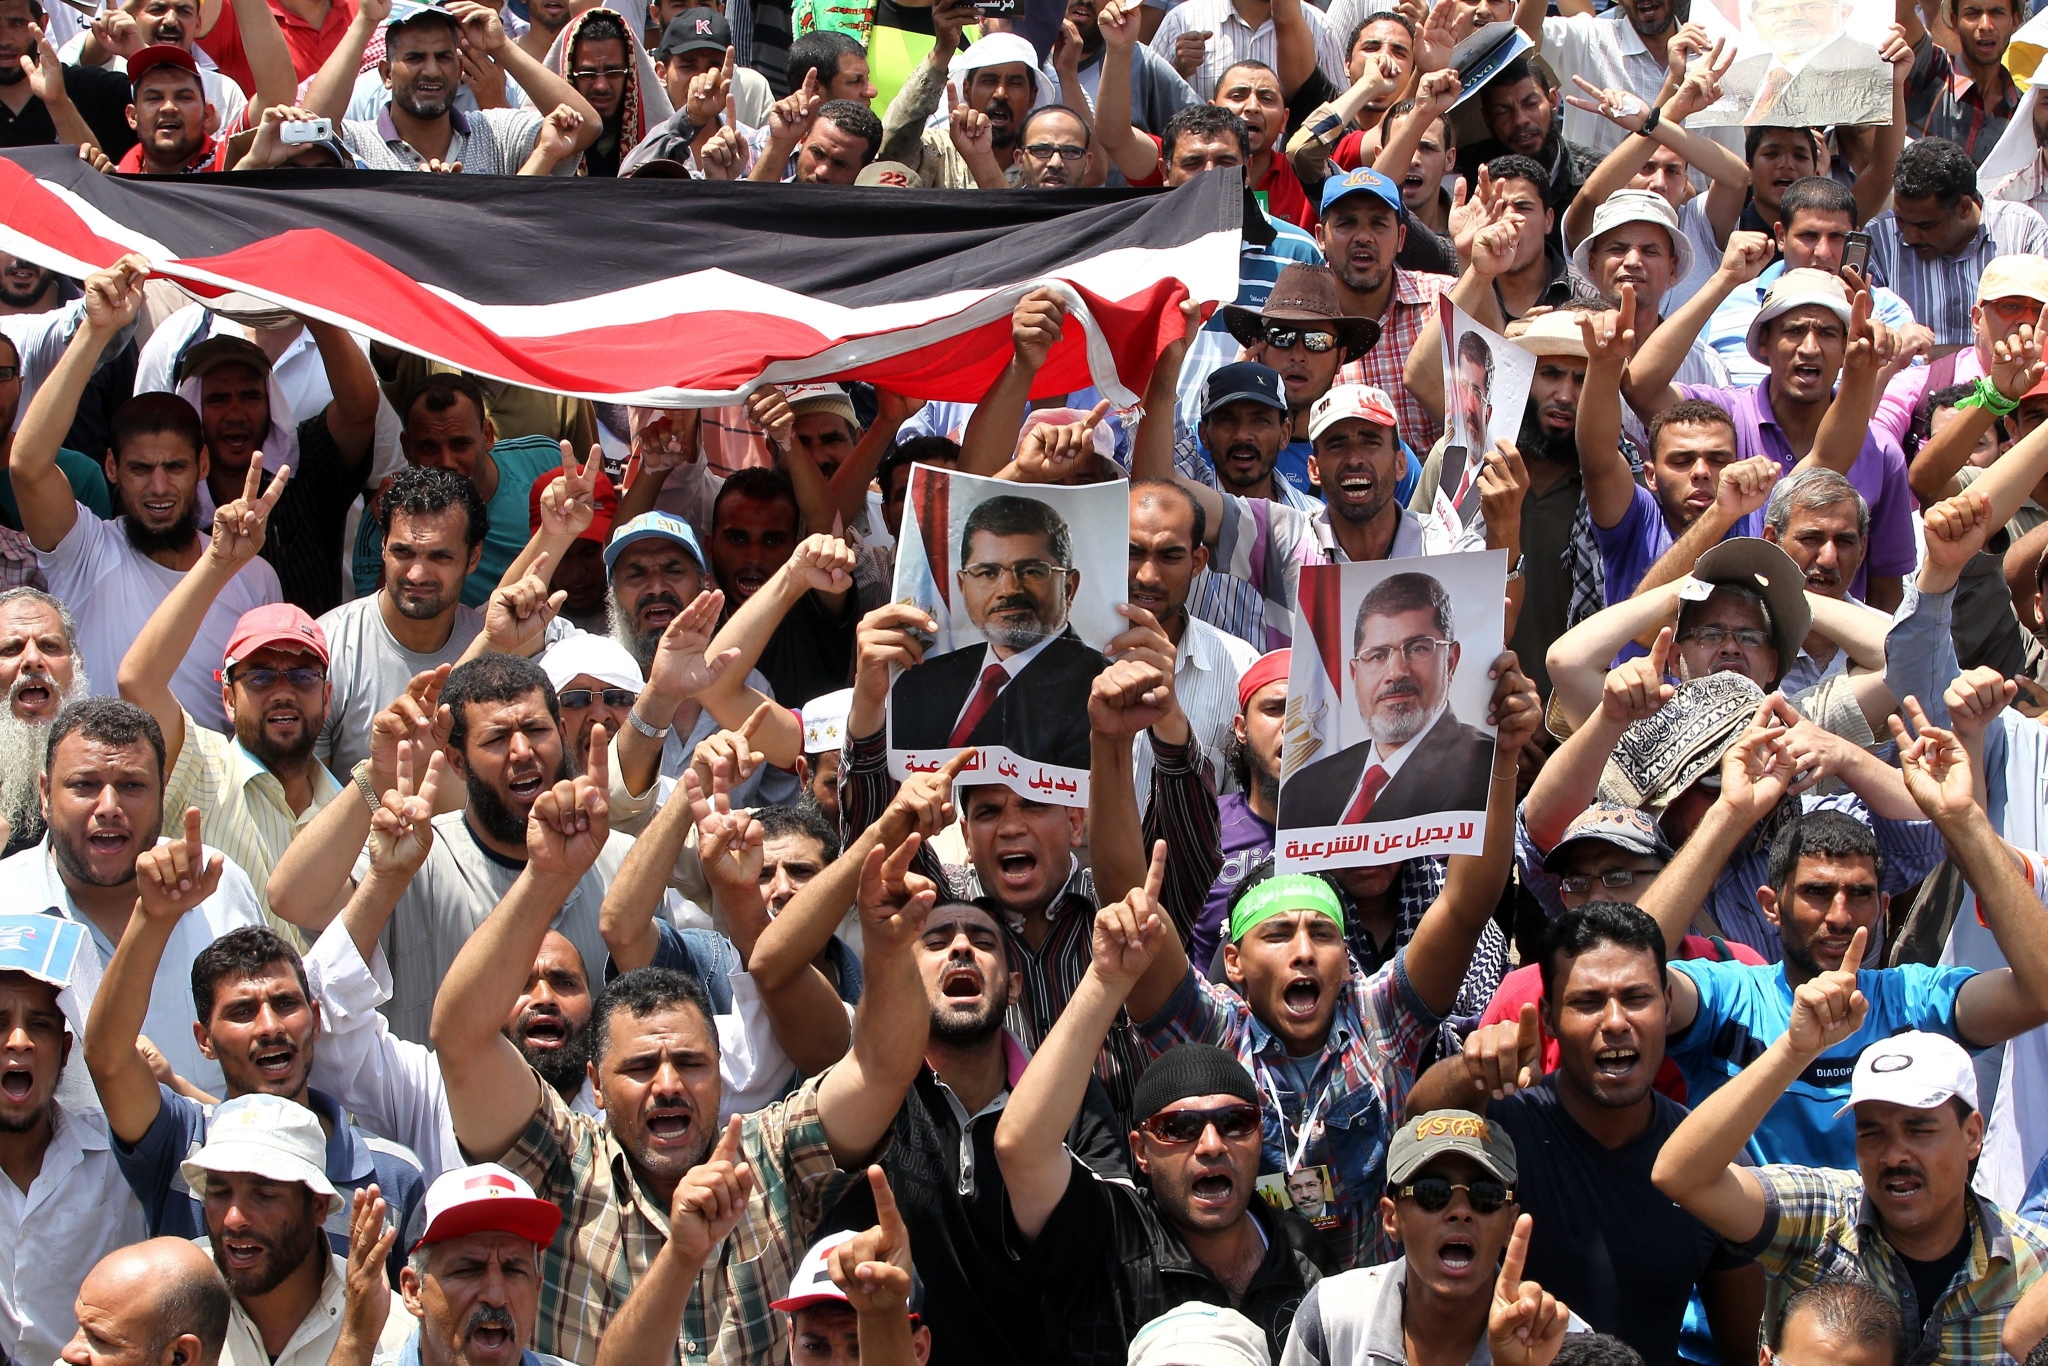 Egyptian supporters of ousted president Mohamed Morsi hold posters depicting Morsi and shout slogans as they protest outside Rabaa al-Adawiya mosque in Cairo in Egypt. Photo: EPA